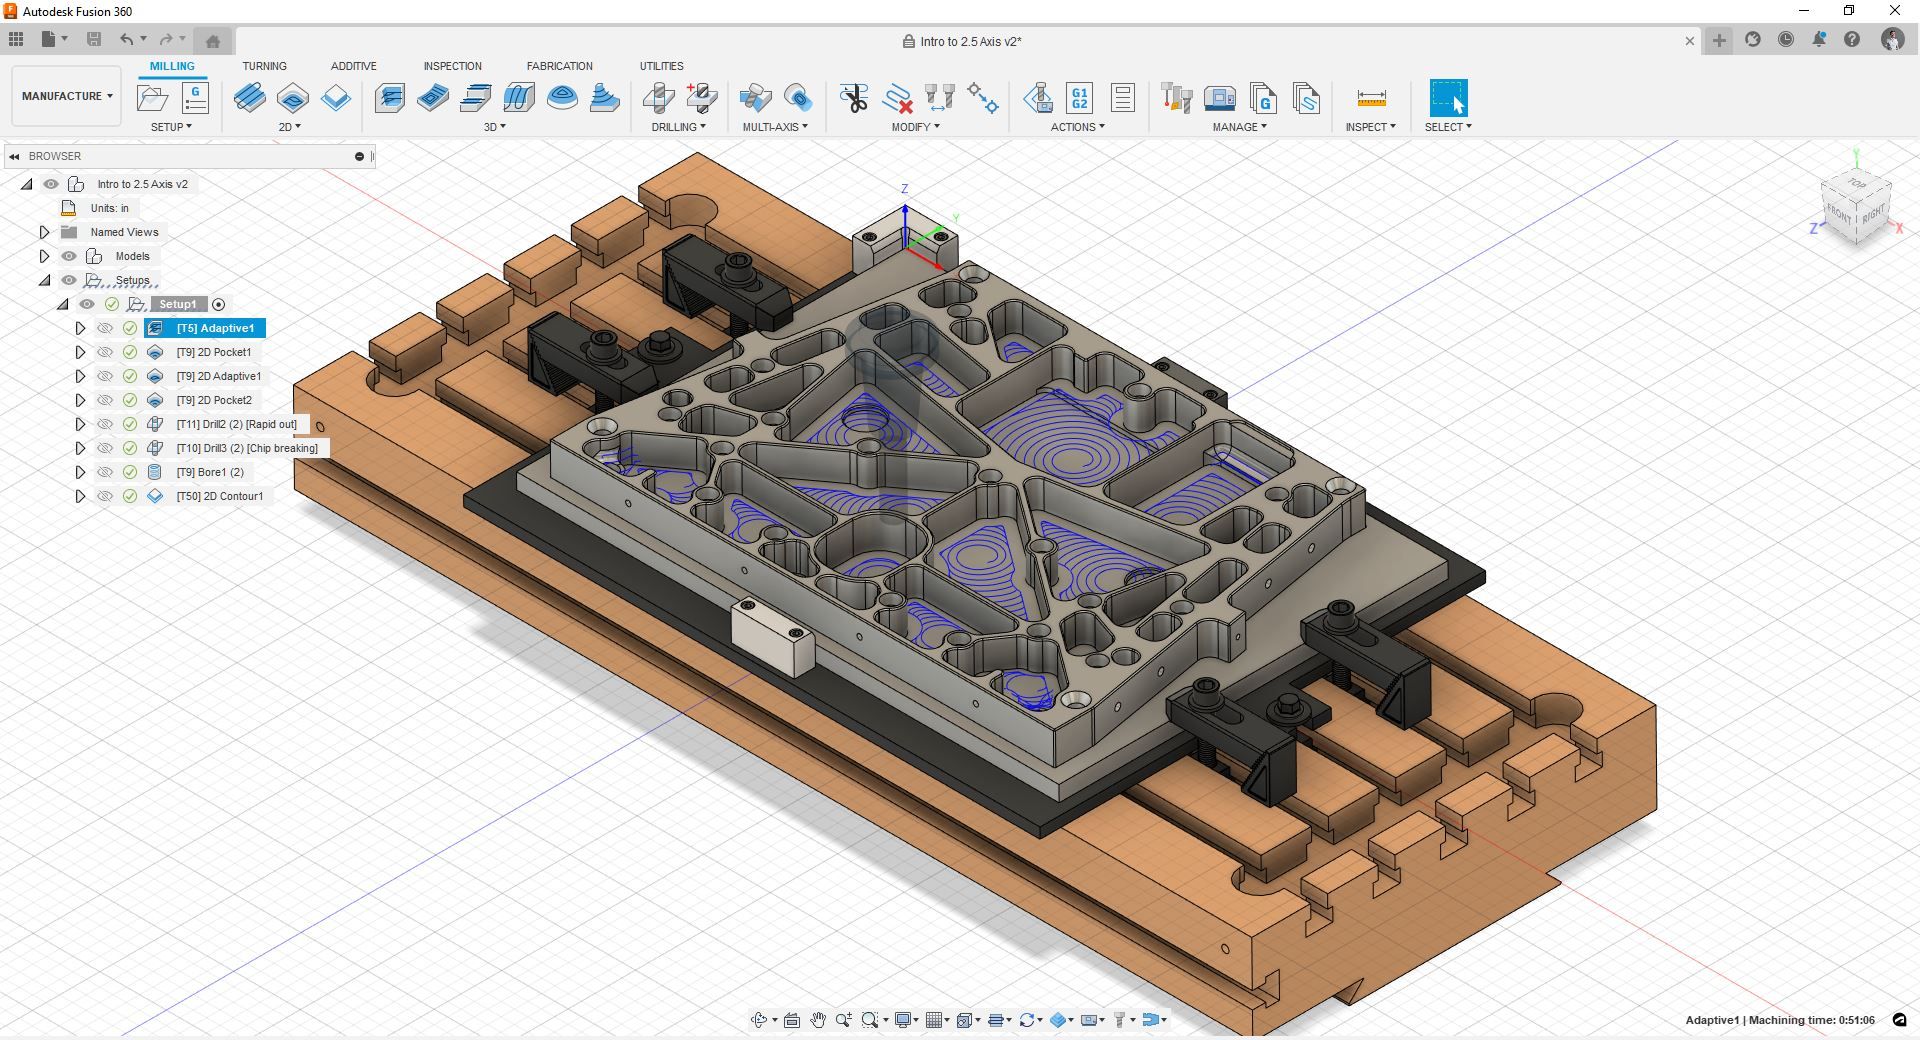 Screenshot of a model in Autodesk Fusion